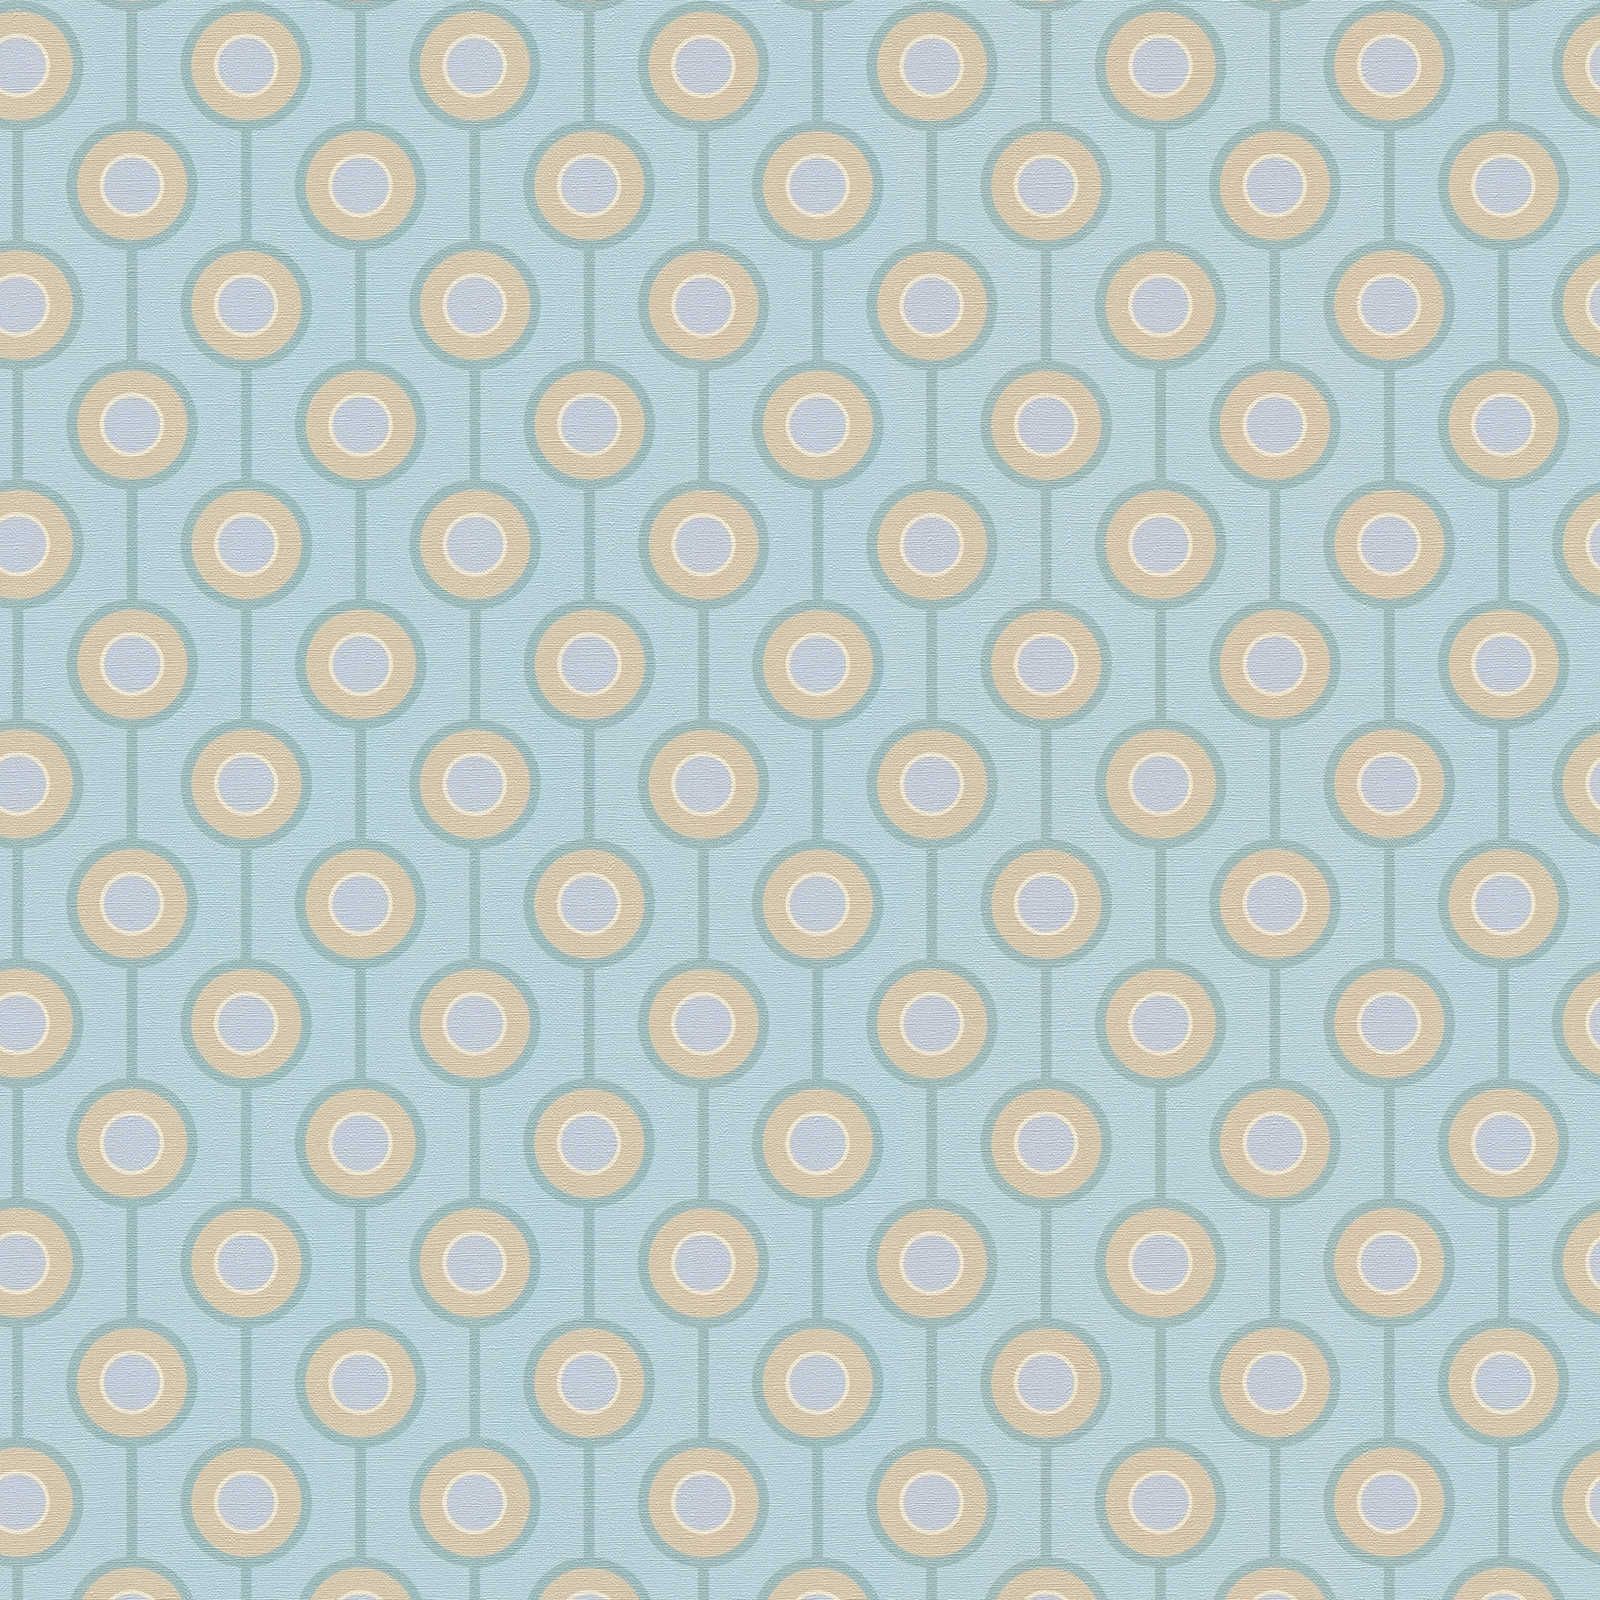 Retro circle pattern on lightly textured non-woven wallpaper - turquoise, blue, beige
